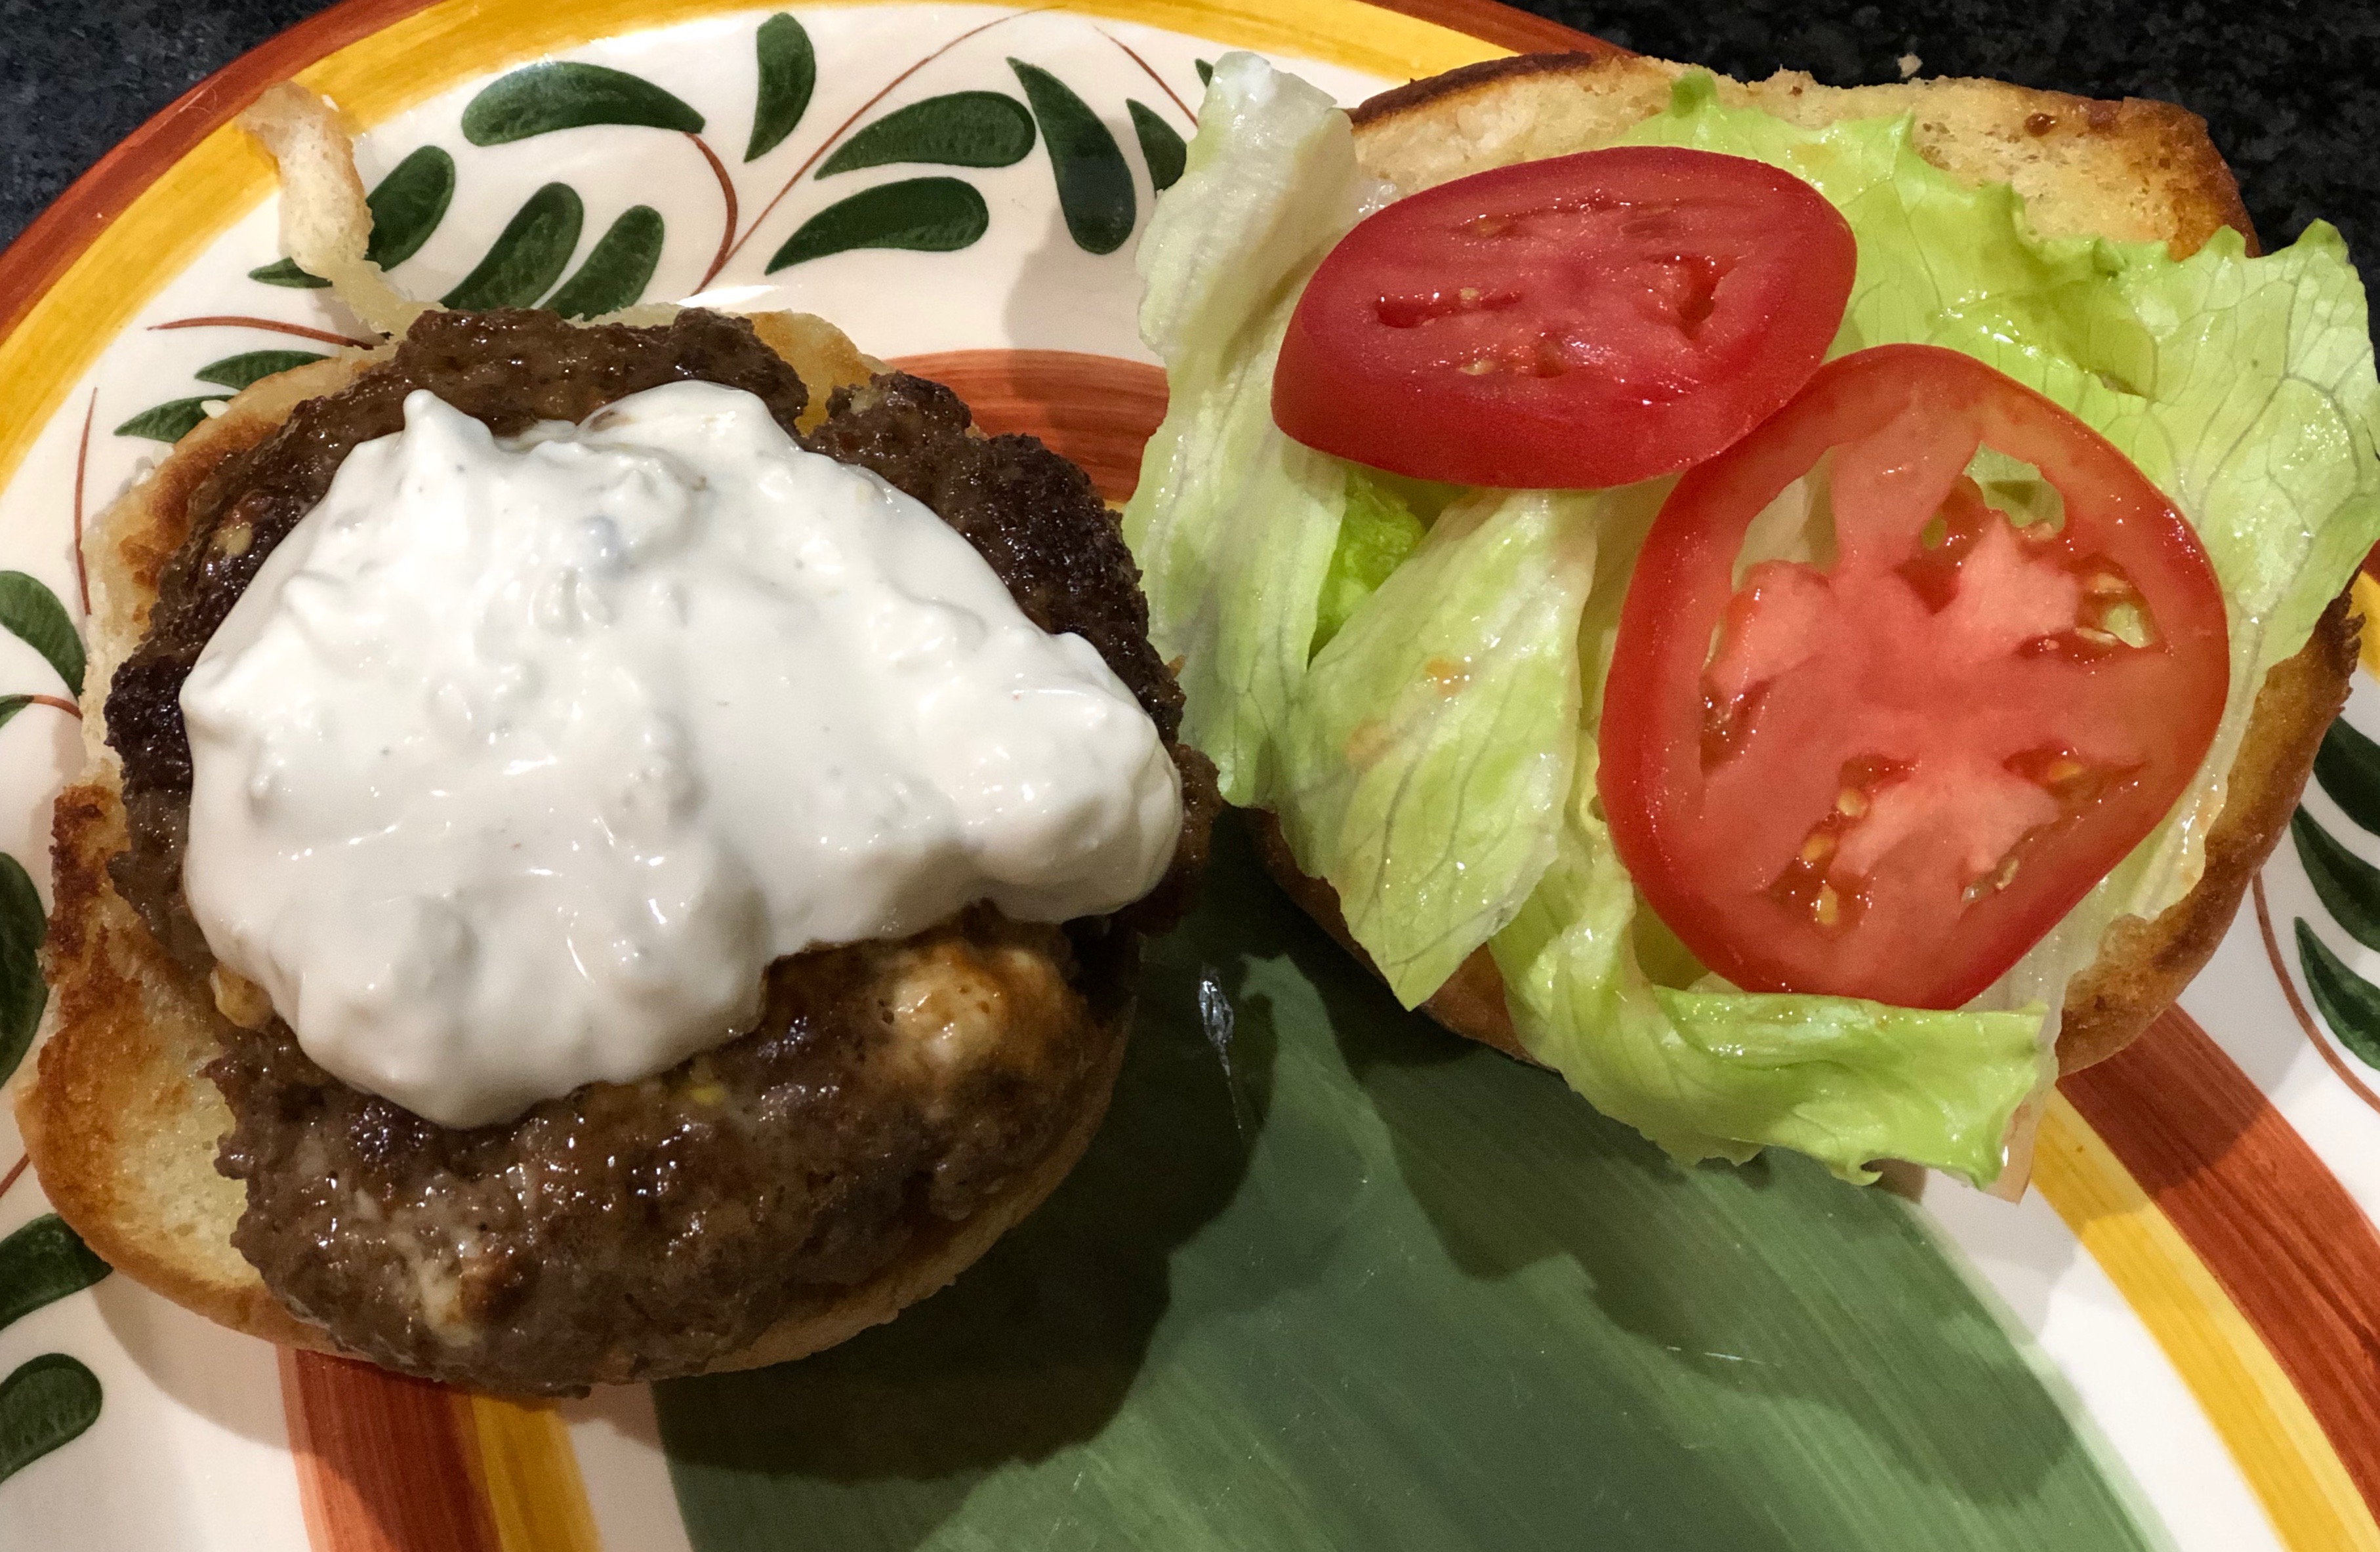 Black and Blue Burgers